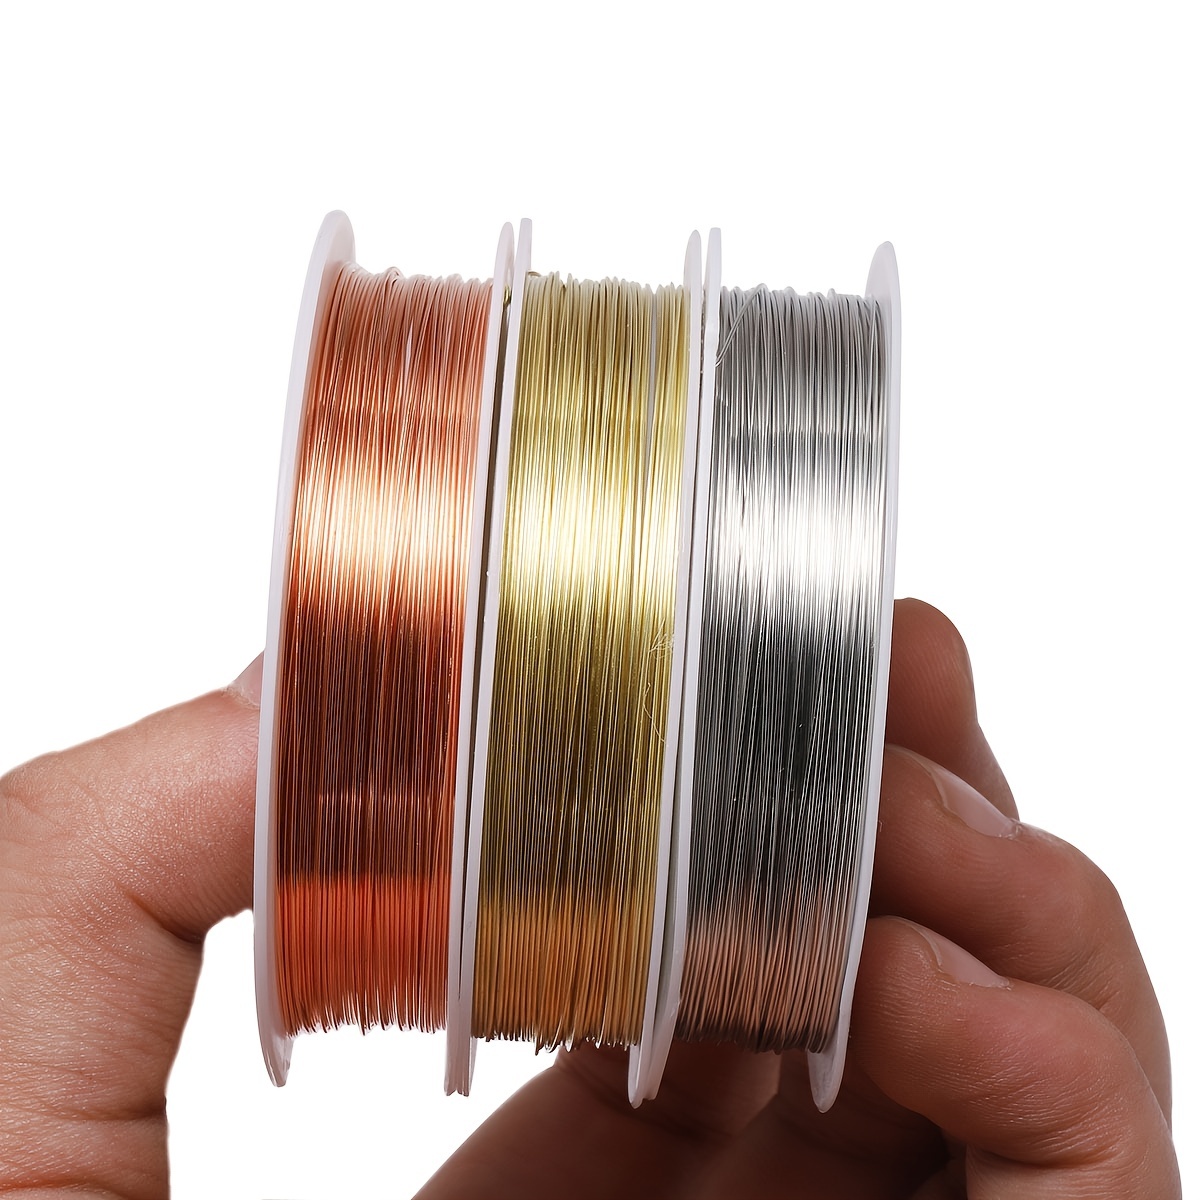 Anezus 12 Rolls Jewelry Wire Craft Wire Tarnish Resistant Beading Wire for Jewelry Making Supplies